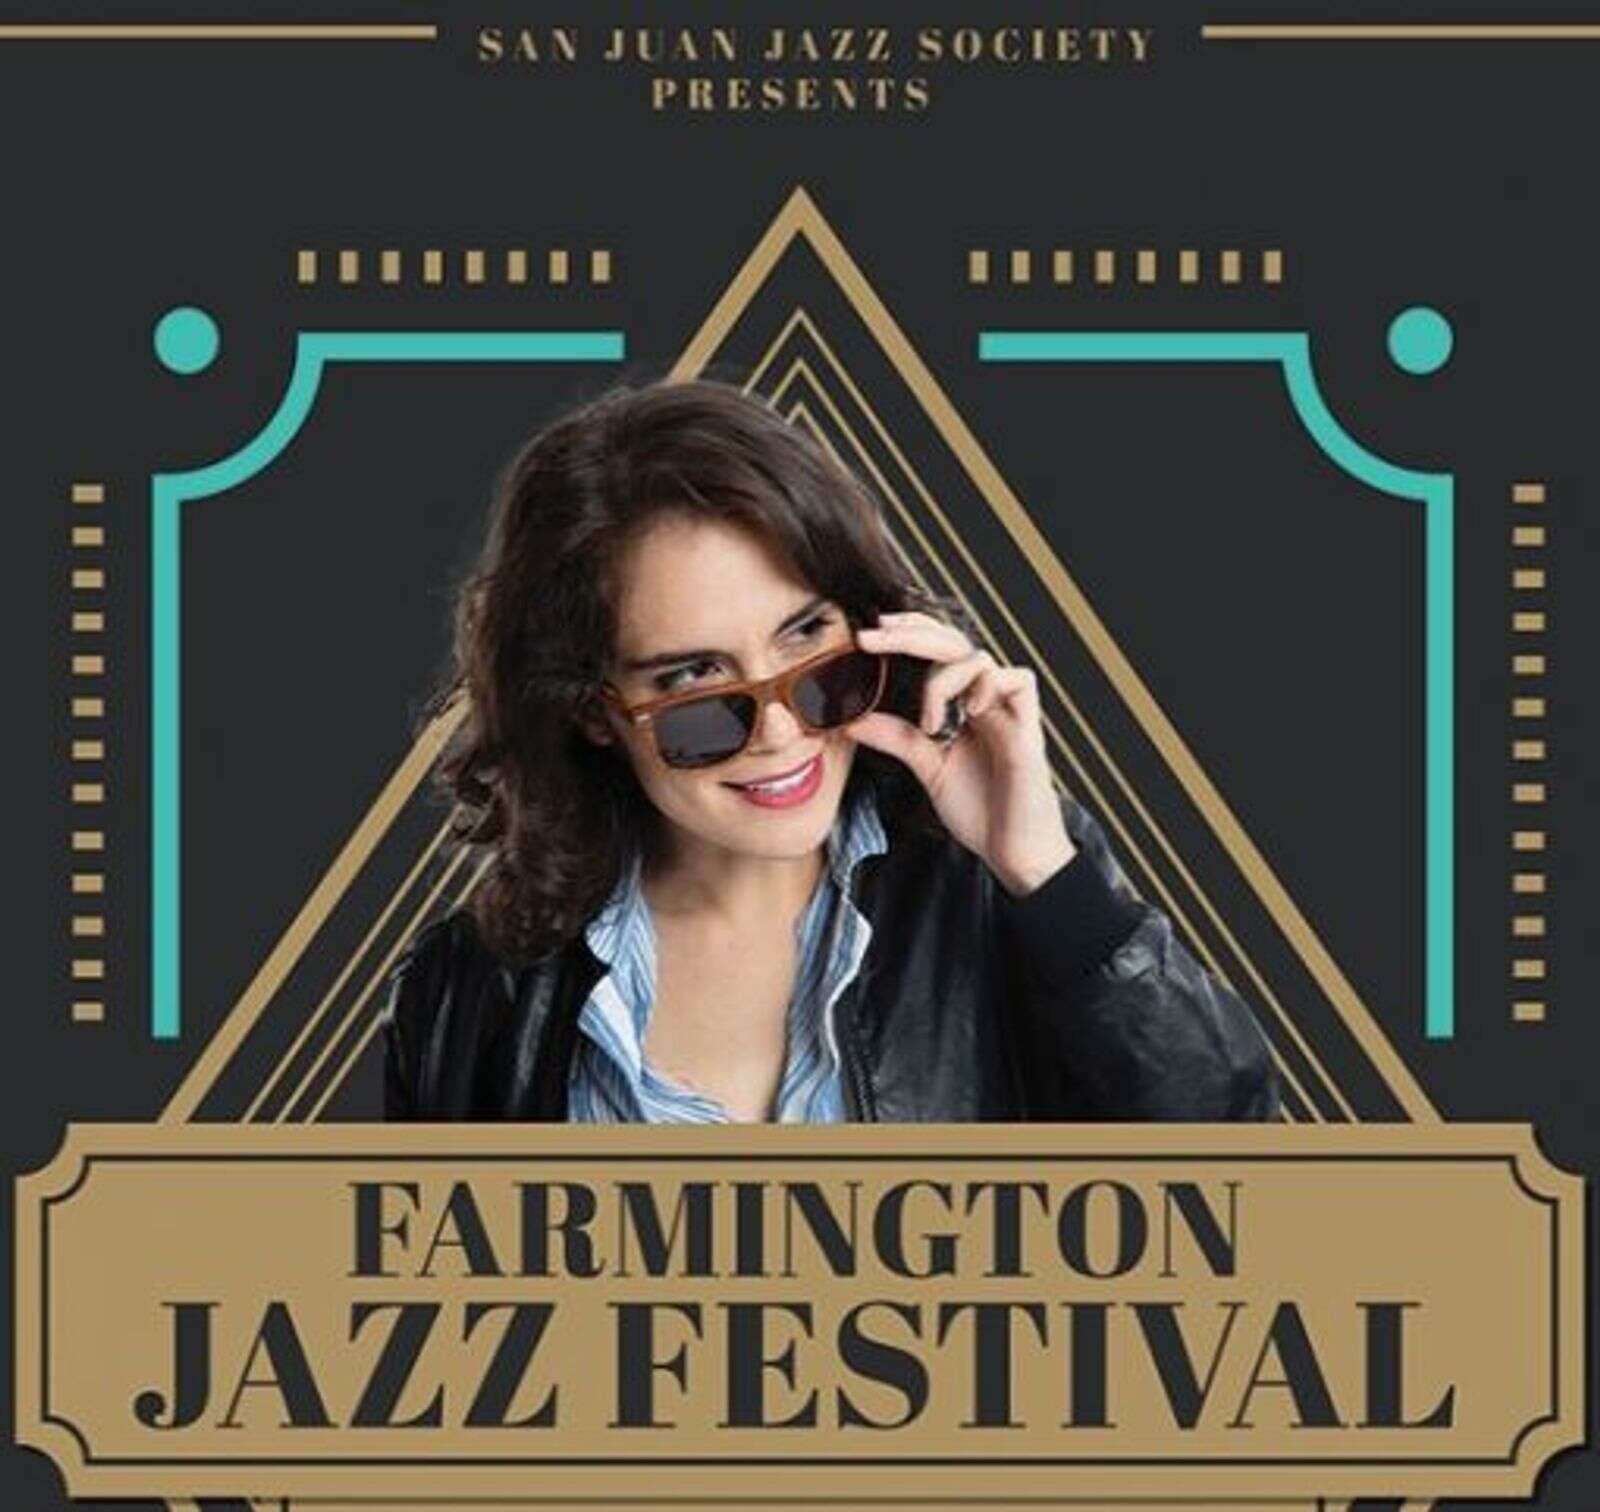 Farmington Events Calendar Things to do in Northern New Mexico The